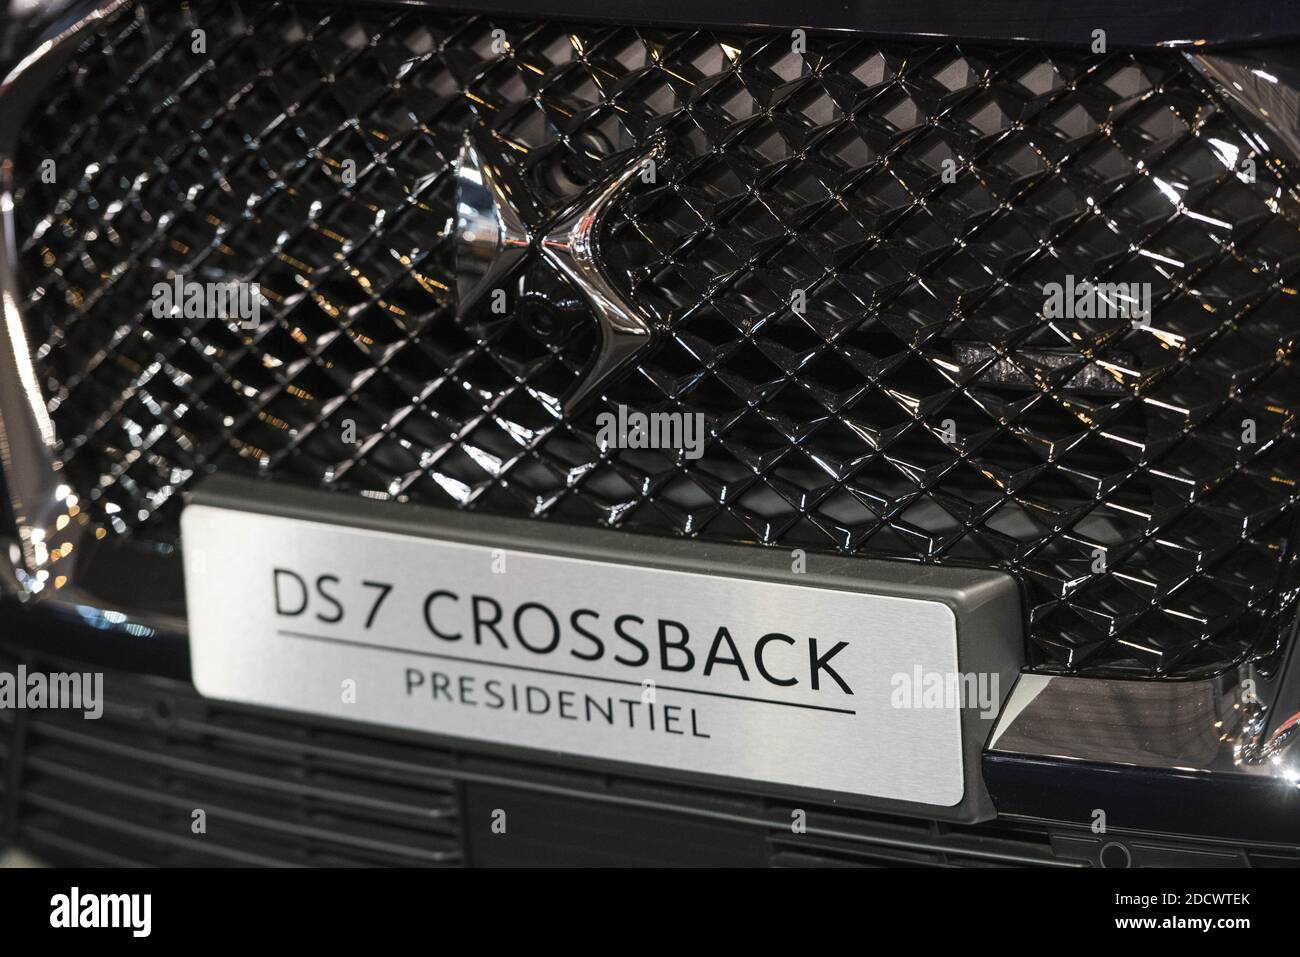 The New Citroen DS7 Crossback and French presidential ( Emmanuel Macron ) car during the Retromobile show on February 07, 2017, in Paris, France. Ancient car collectors from around the world come together to admire the old vehicles of another period. With more than 500 cars exhibited, Retromobile has become an international event for enthusiasts and collectors. Photo by ELIOT BLONDET/ABACAPRESS.COM Stock Photo